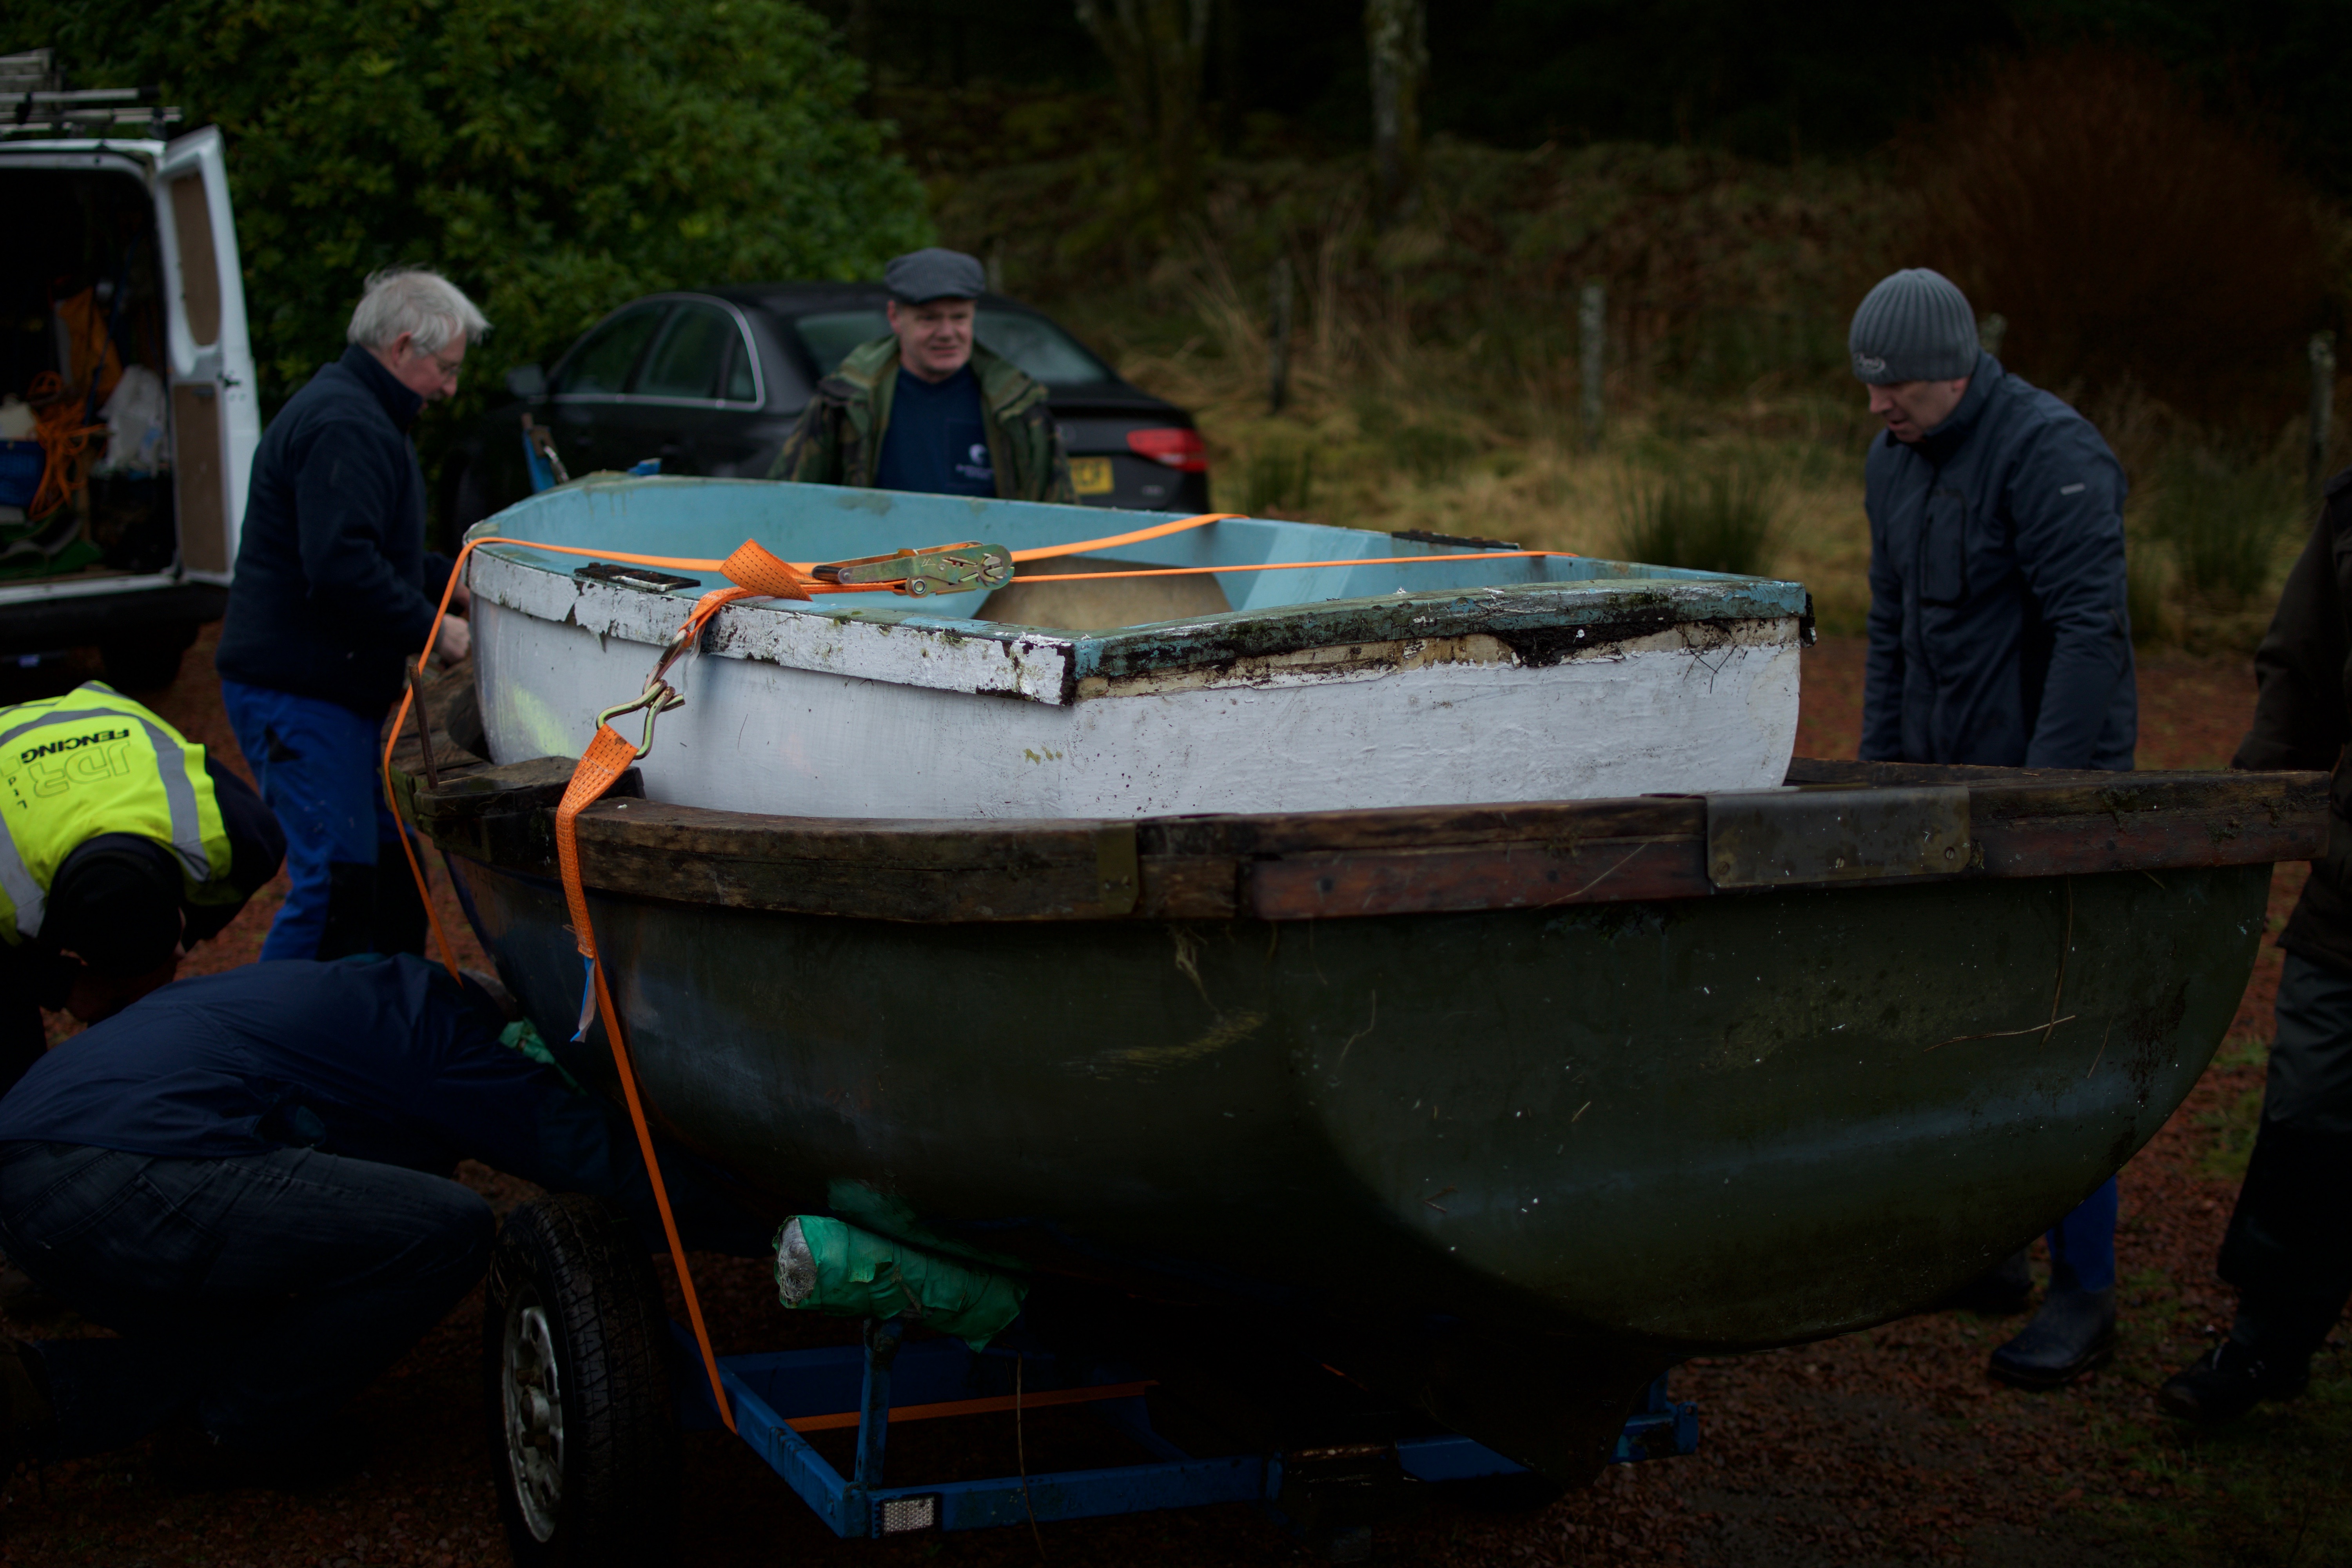 The boats packed up and ready for the journey to be readied for the Trout Season ahead.